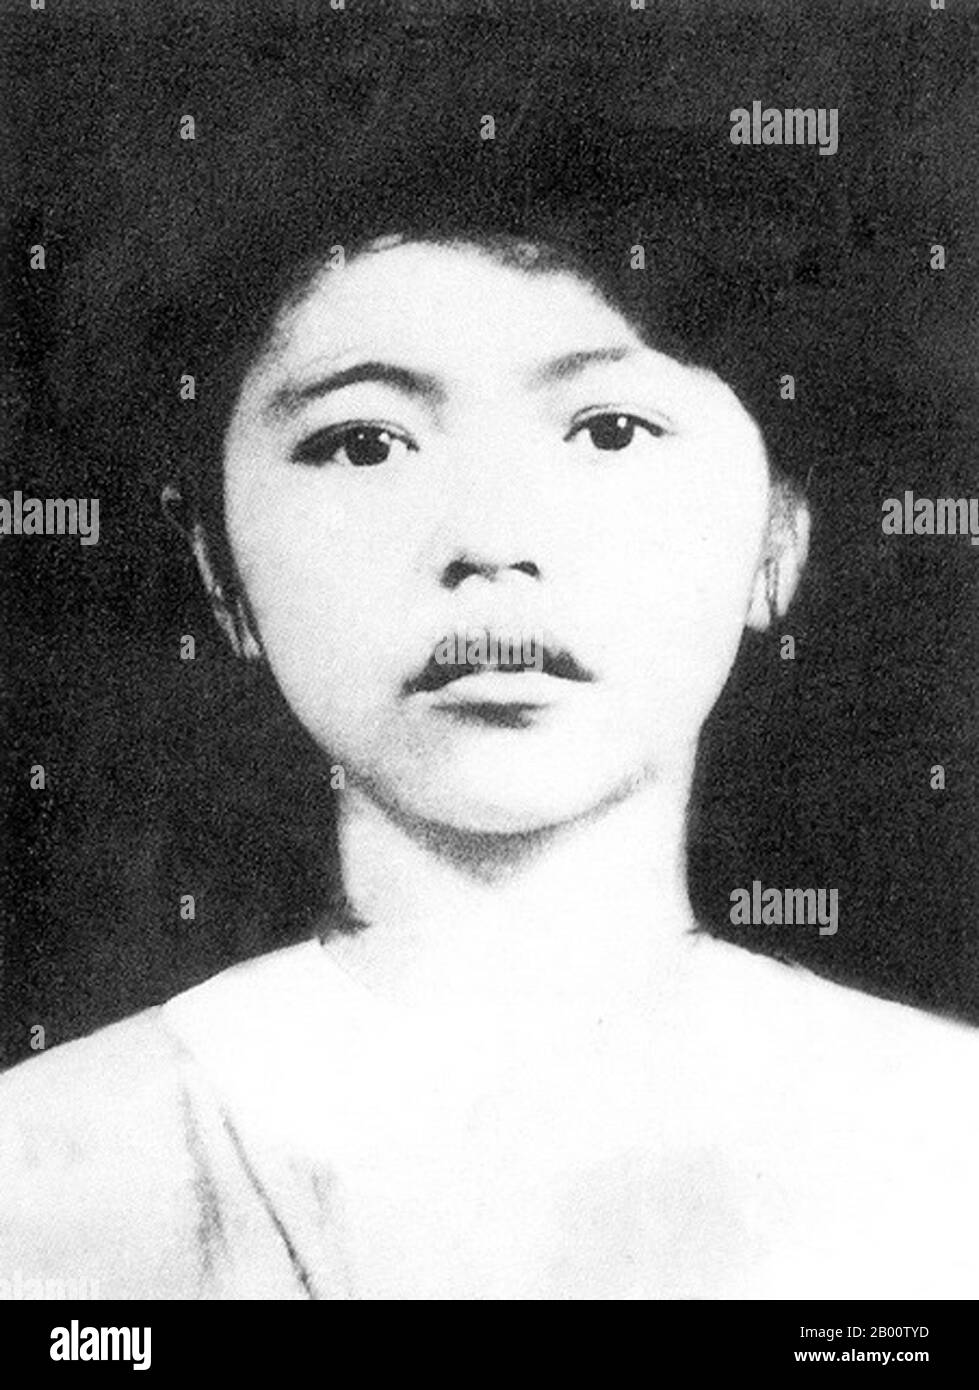 Vietnam: Vo Thi Sau (1935-1952), 17 year old heroine and patriot executed by French firing squad, March 13, 1952.  Vo Thi Sau (1935-1952), real name Nguyen Thi Sau, was a 17 year old heroine and patriot executed by French firing squad, March 13, 1952, just seven years after metropolitan France had been liberated from Nazi occupation. She was arrested in 1950, aged 15 years, for throwing a hand grenade in the market at Dat Do which killed three French soldiers. She was sent to Con Dao Prison island where she was executed by the occupying forces. Vo Thi Sau was posthumously awarded. Stock Photo